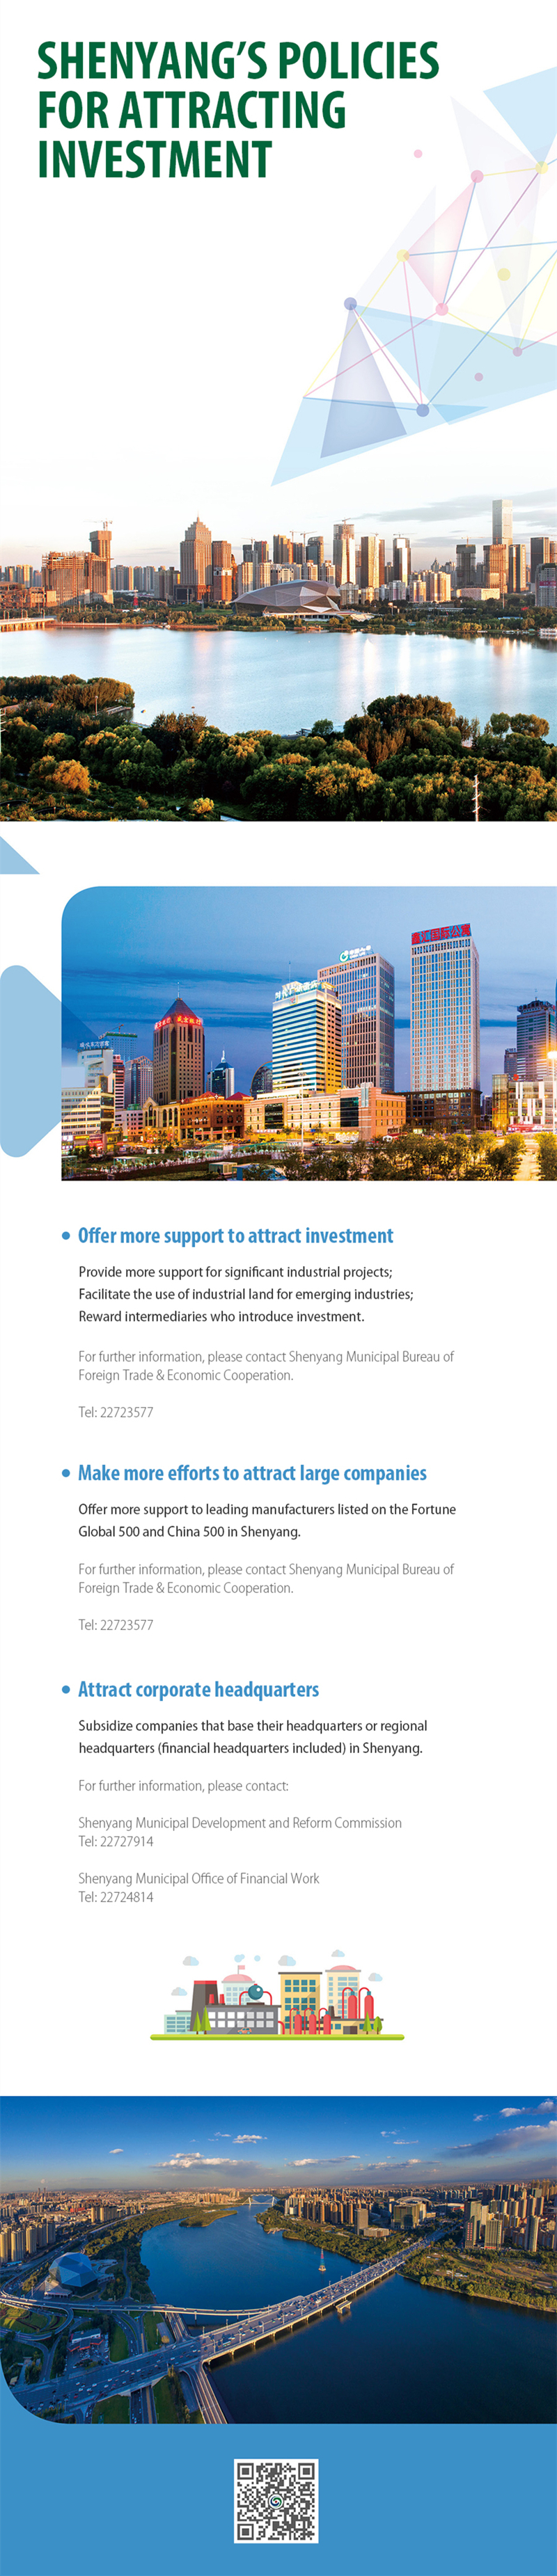 Infographic: Shenyang's policies for attracting investment